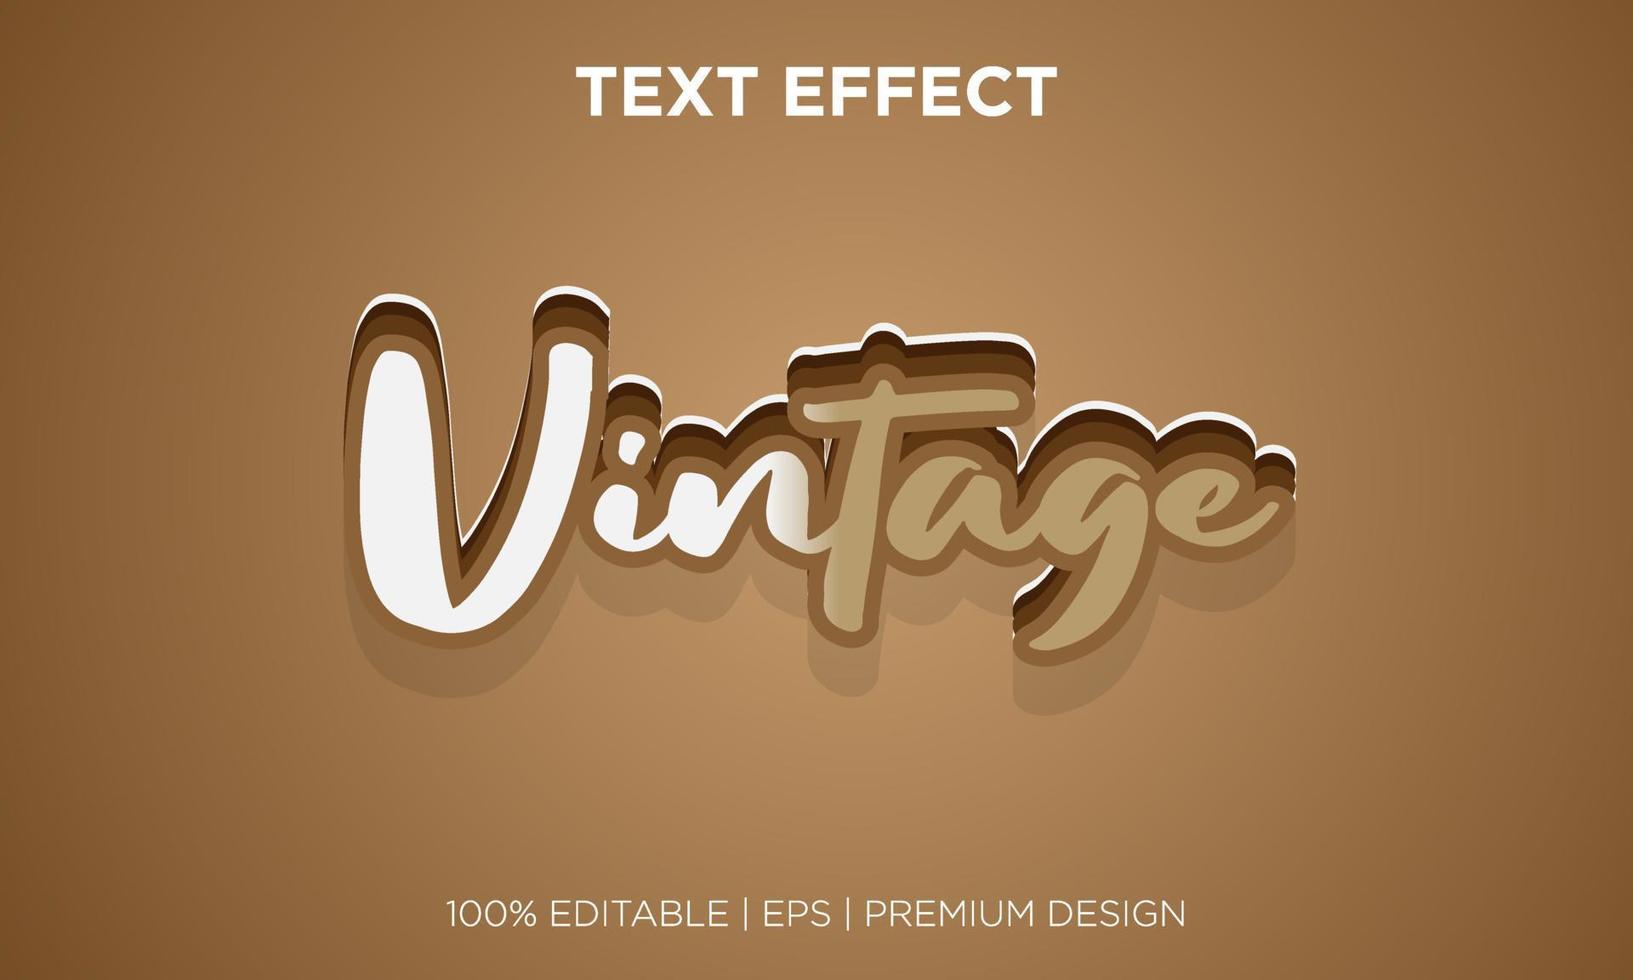 vintage style text effect editable background vector